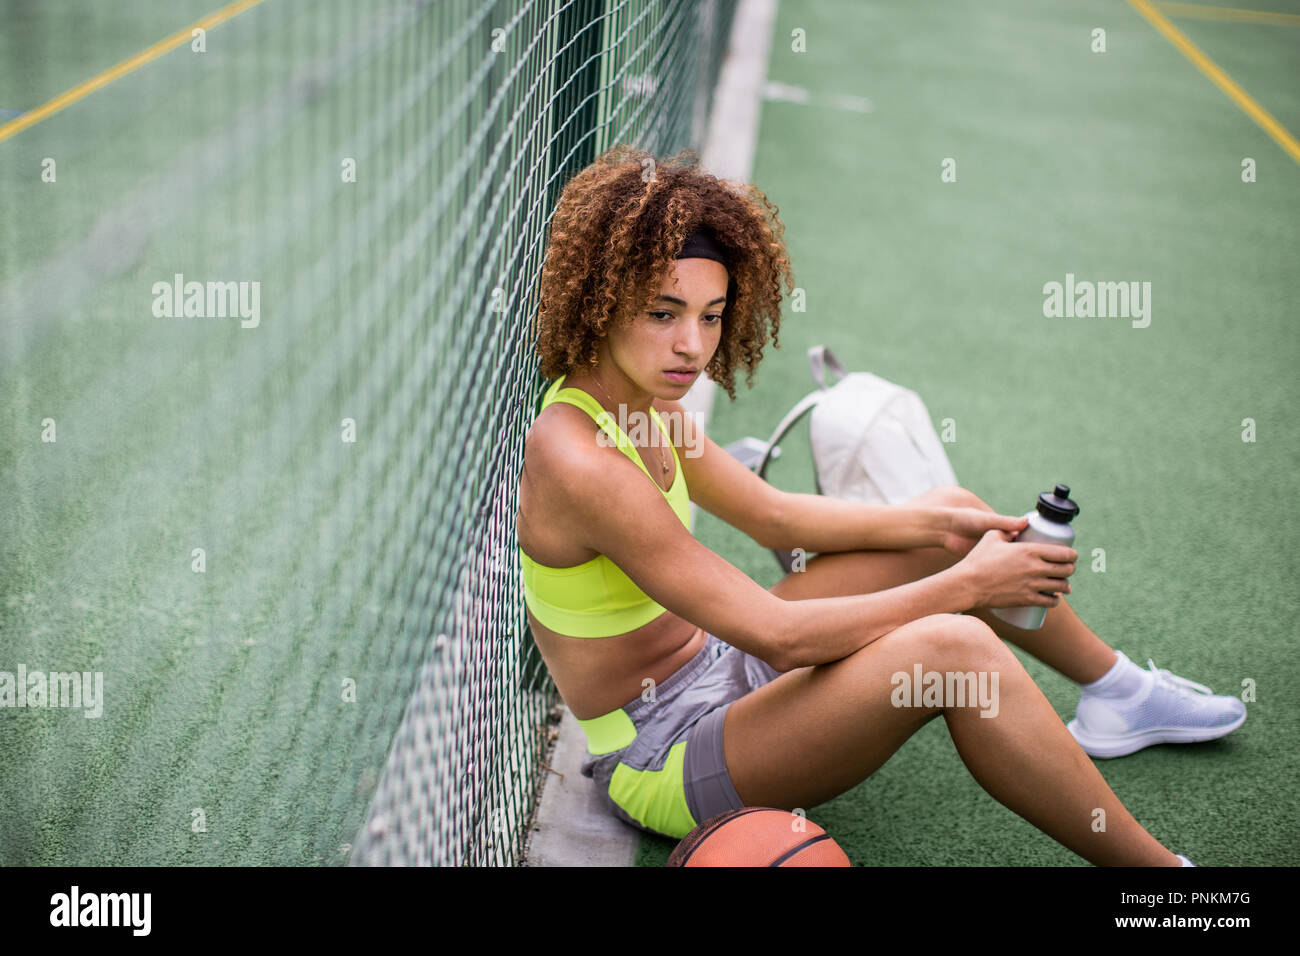 Young adult female sitting on a basketball court Stock Photo